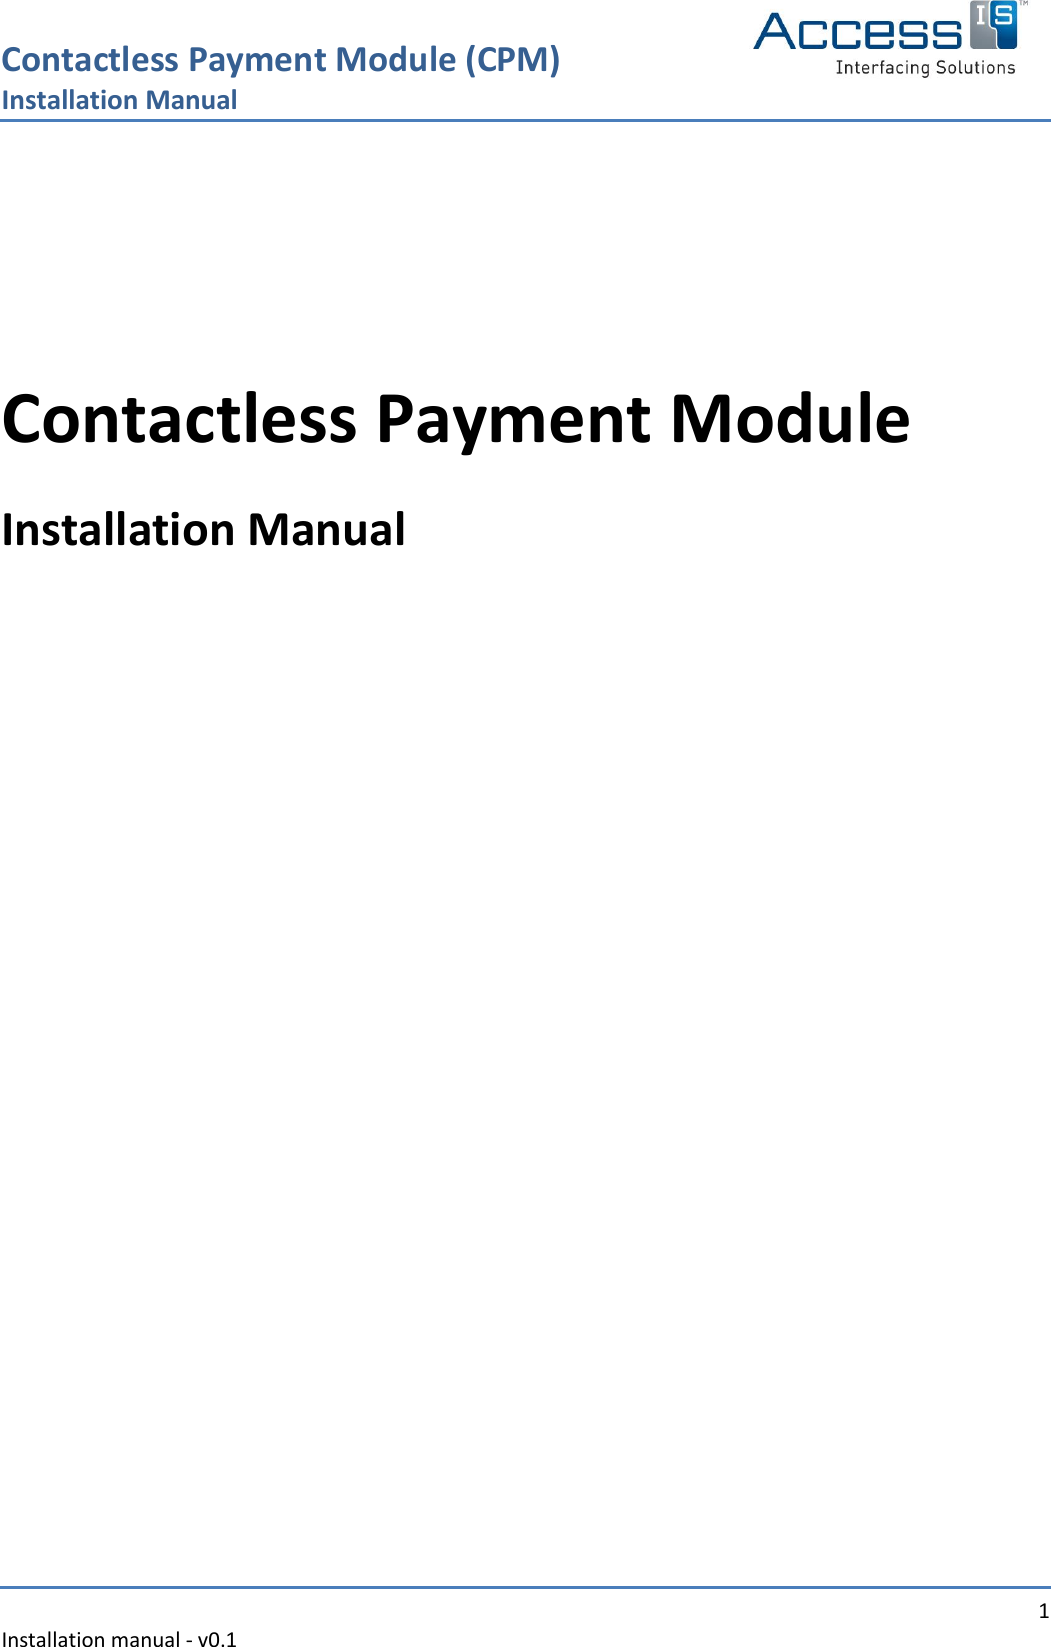 Contactless Payment Module (CPM) Installation Manual   1 Installation manual - v0.1     Contactless Payment Module  Installation Manual      